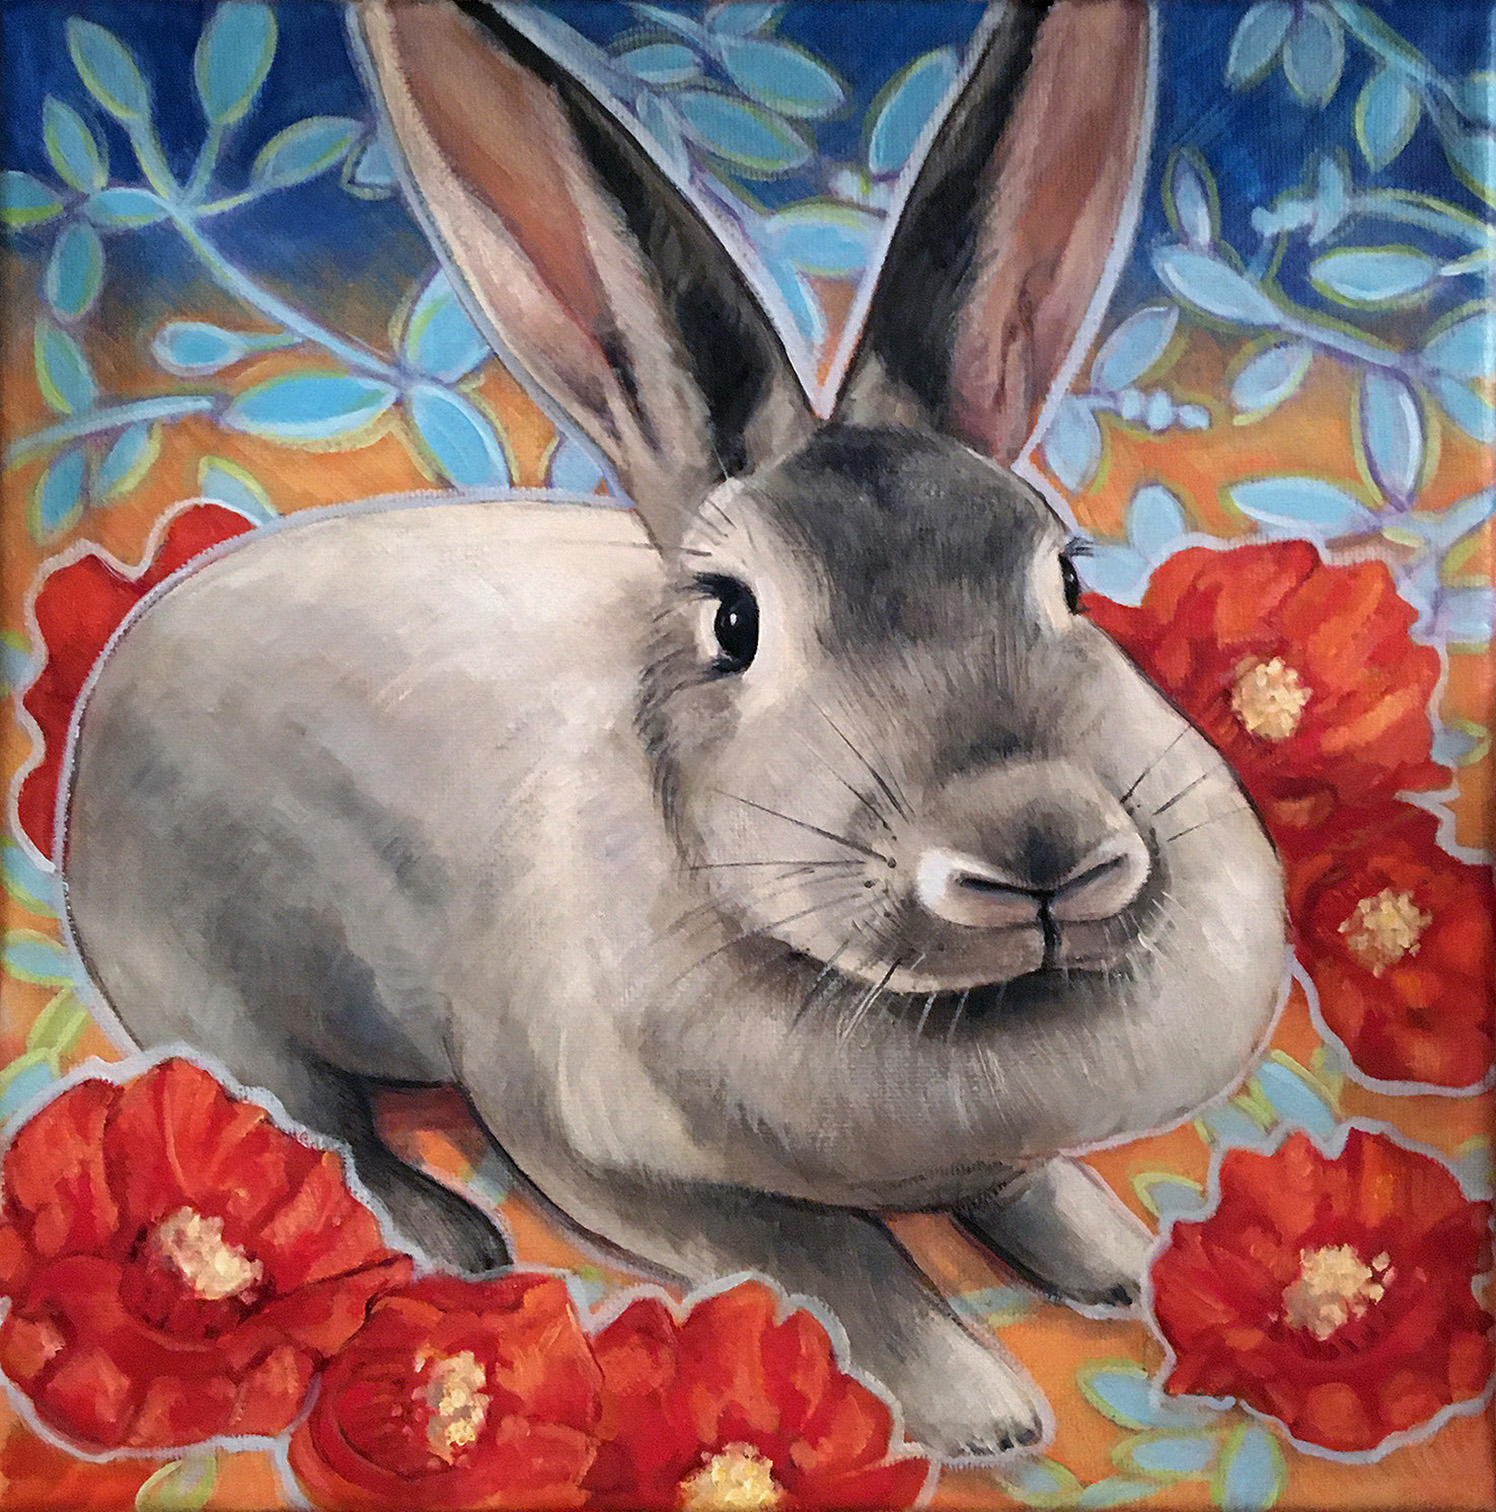 Painted portrait of a pet bunny named Zoe.